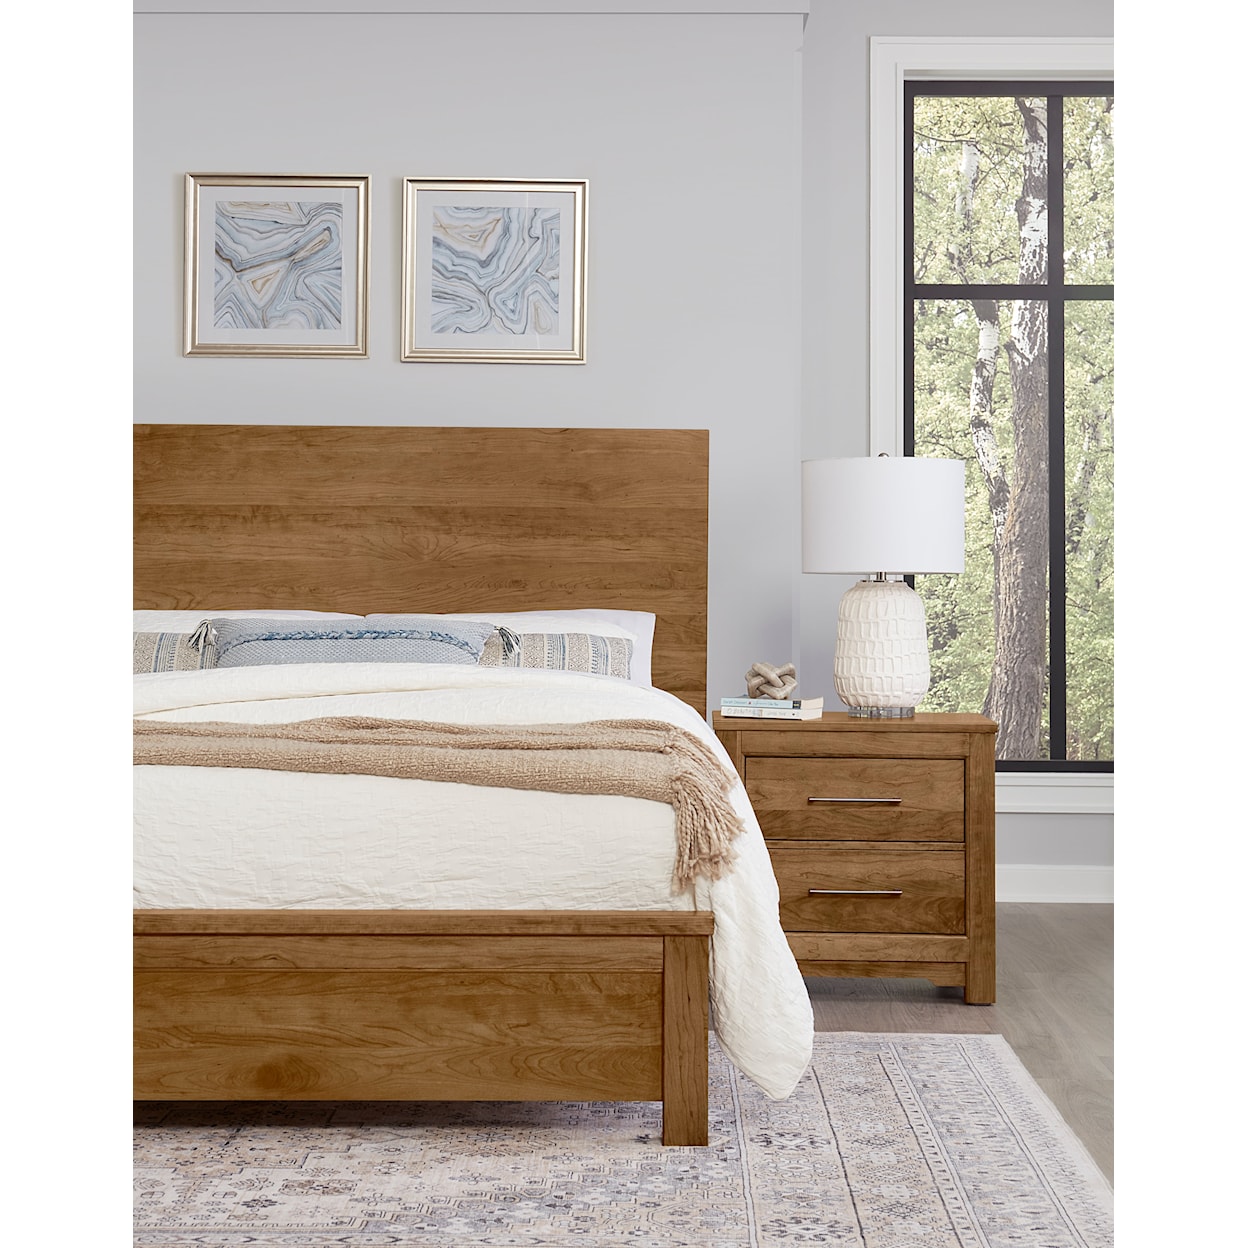 Artisan & Post Crafted Cherry King Plank Bed